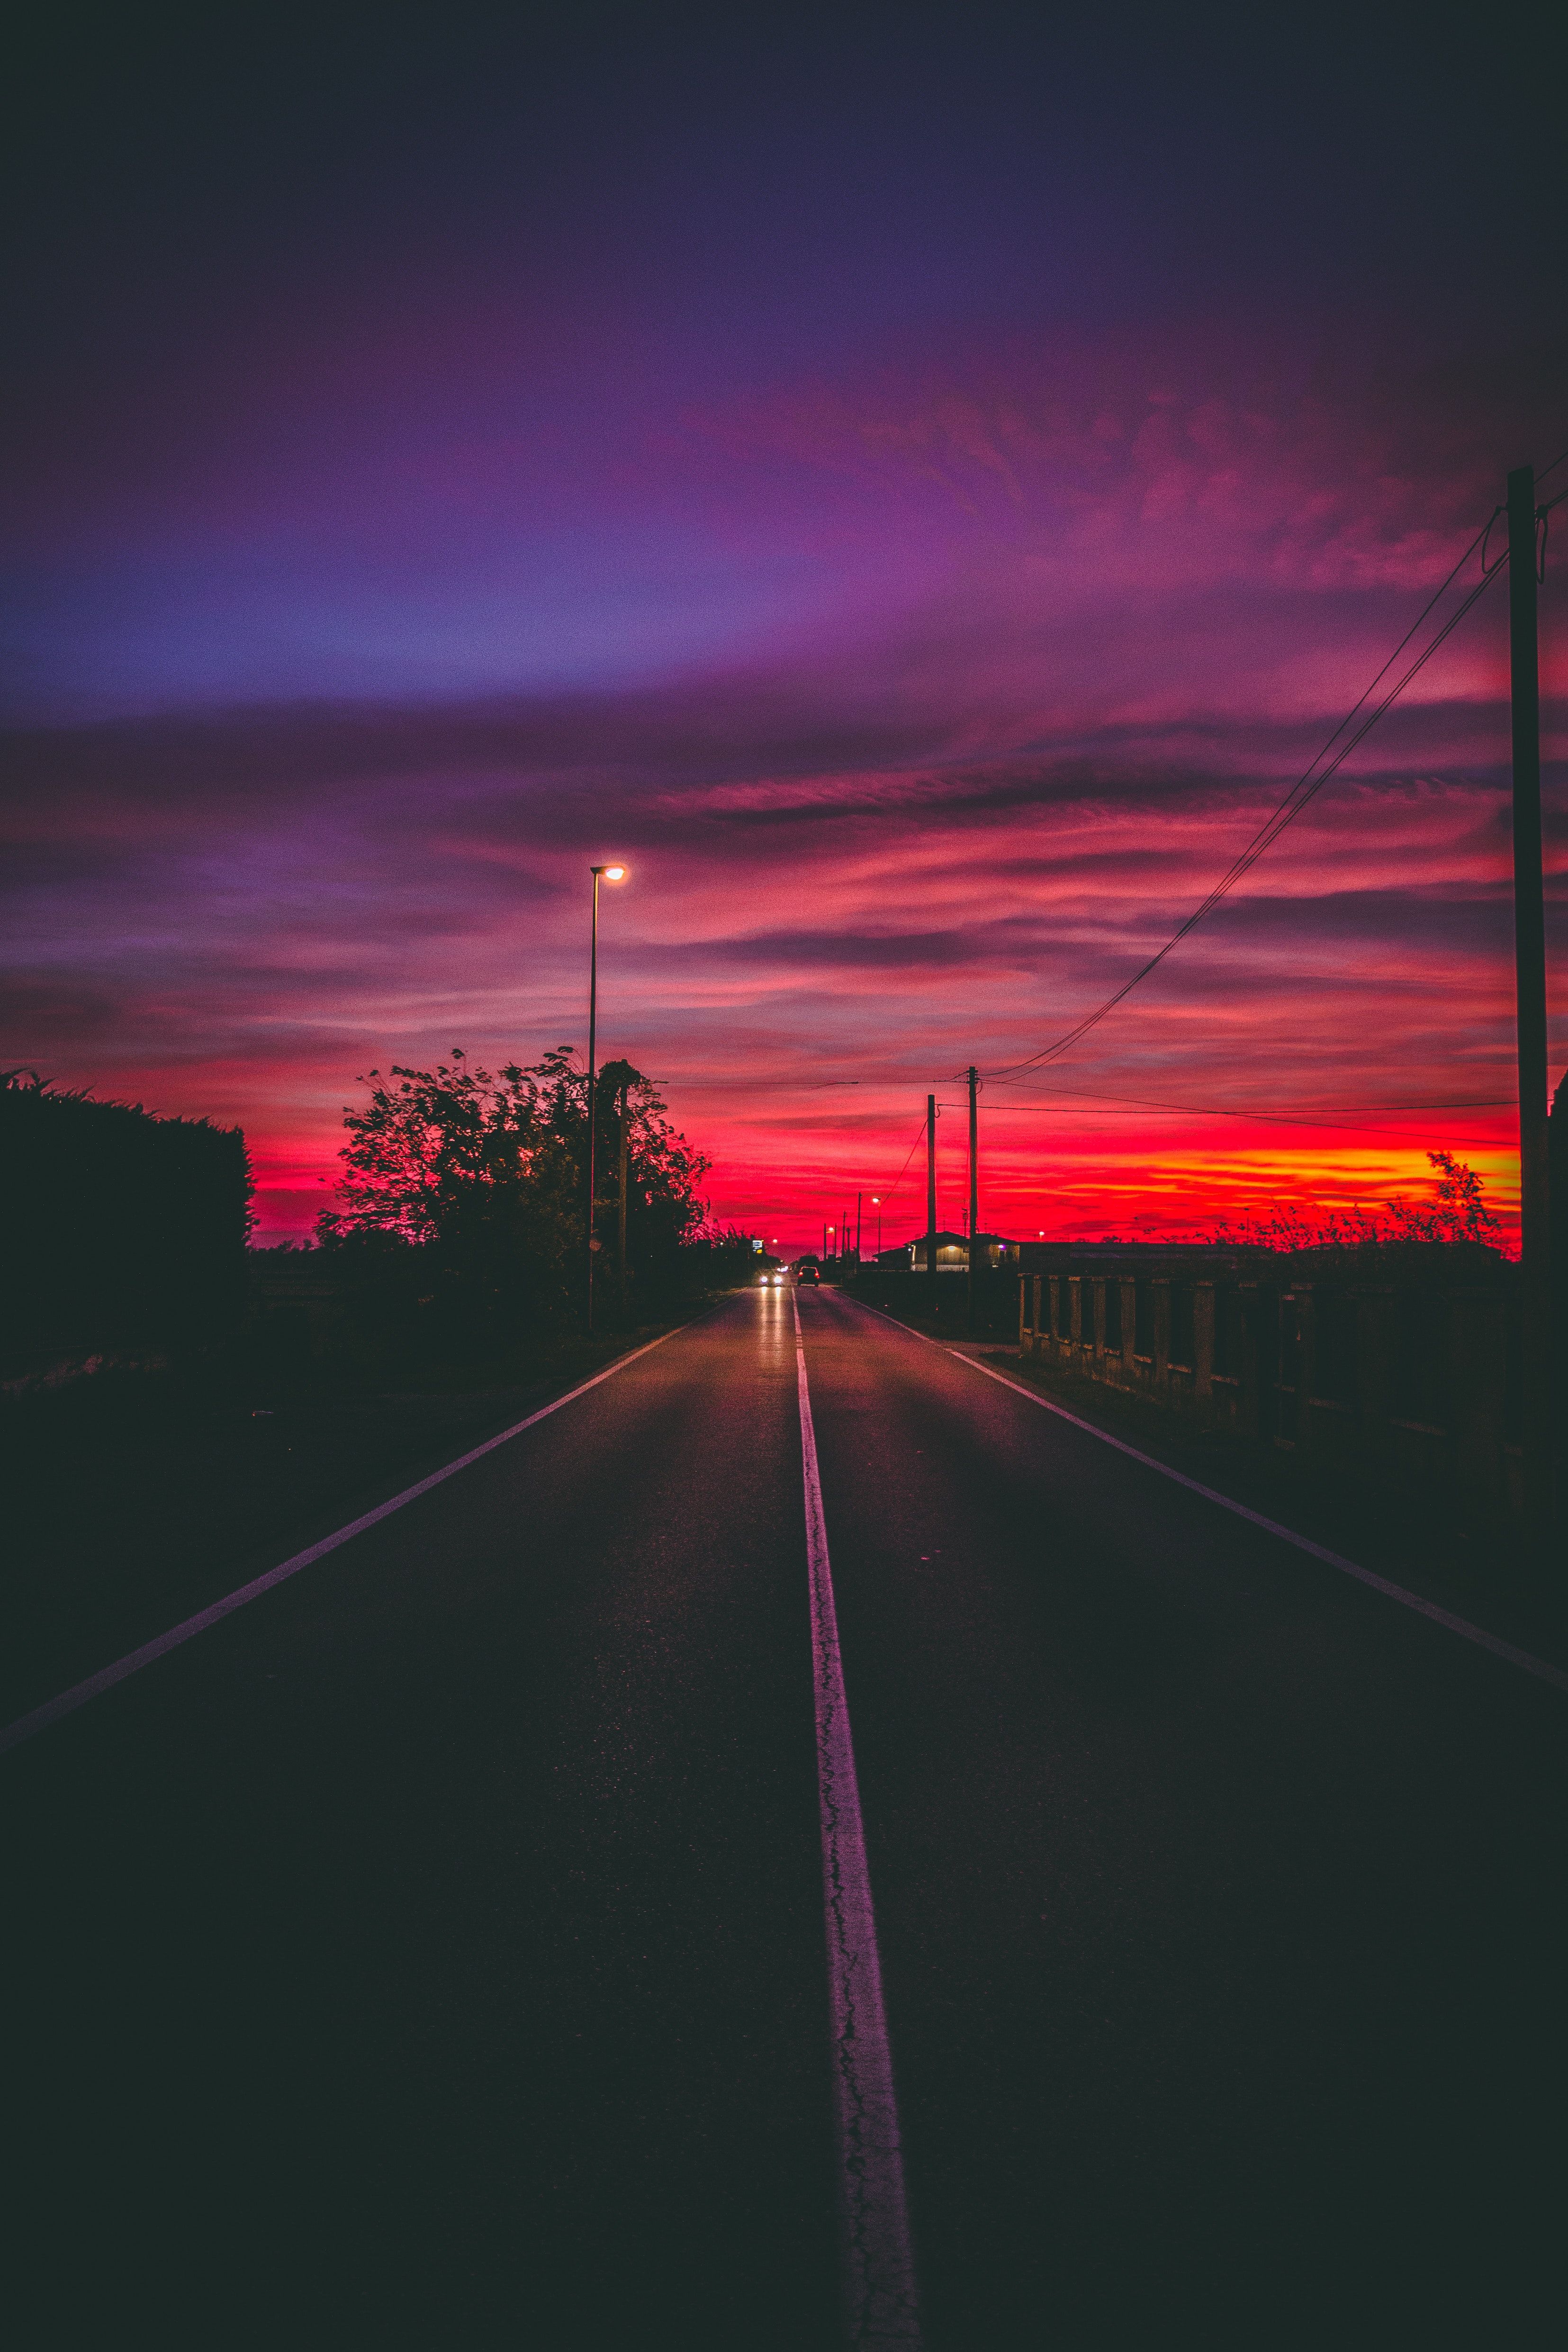 A road with no cars on it at sunset - Road